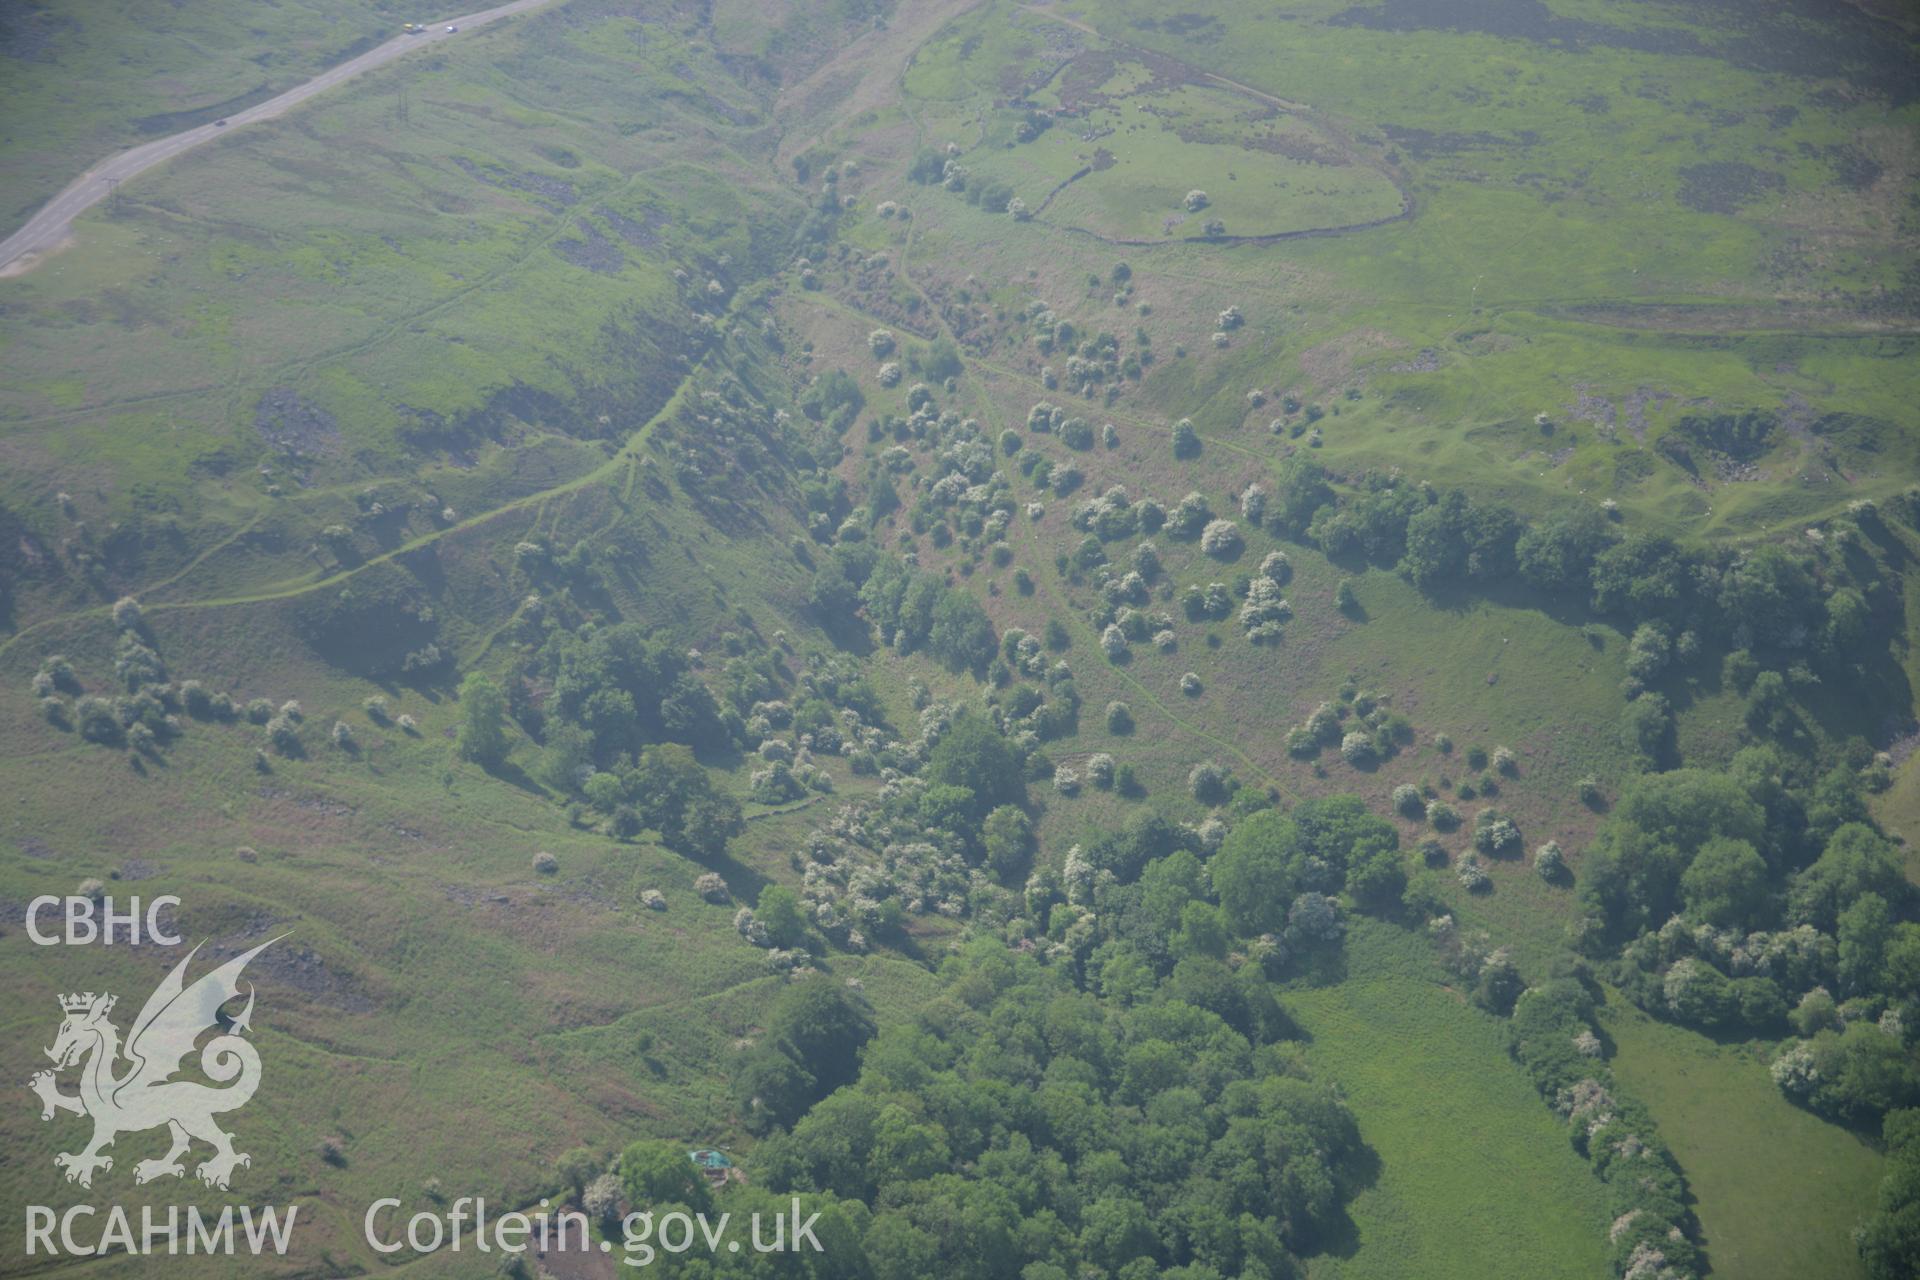 RCAHMW colour oblique aerial photograph of Garnddyrys Ironworks Tramway (Hill's Tramroad), and The Tumble, from the north. Taken on 09 June 2006 by Toby Driver.